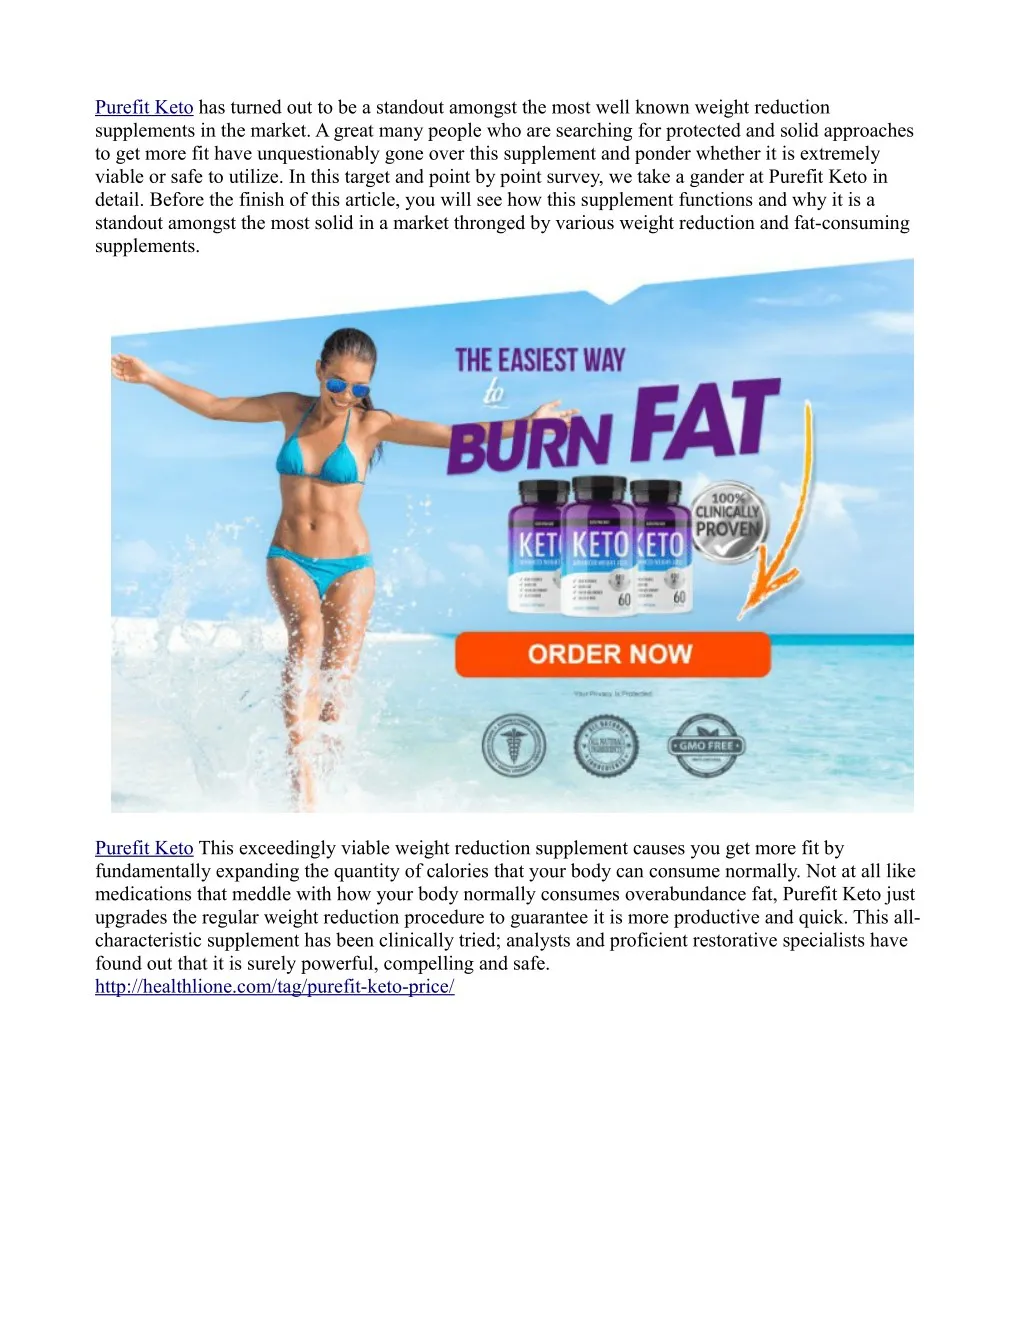 purefit keto has turned out to be a standout n.